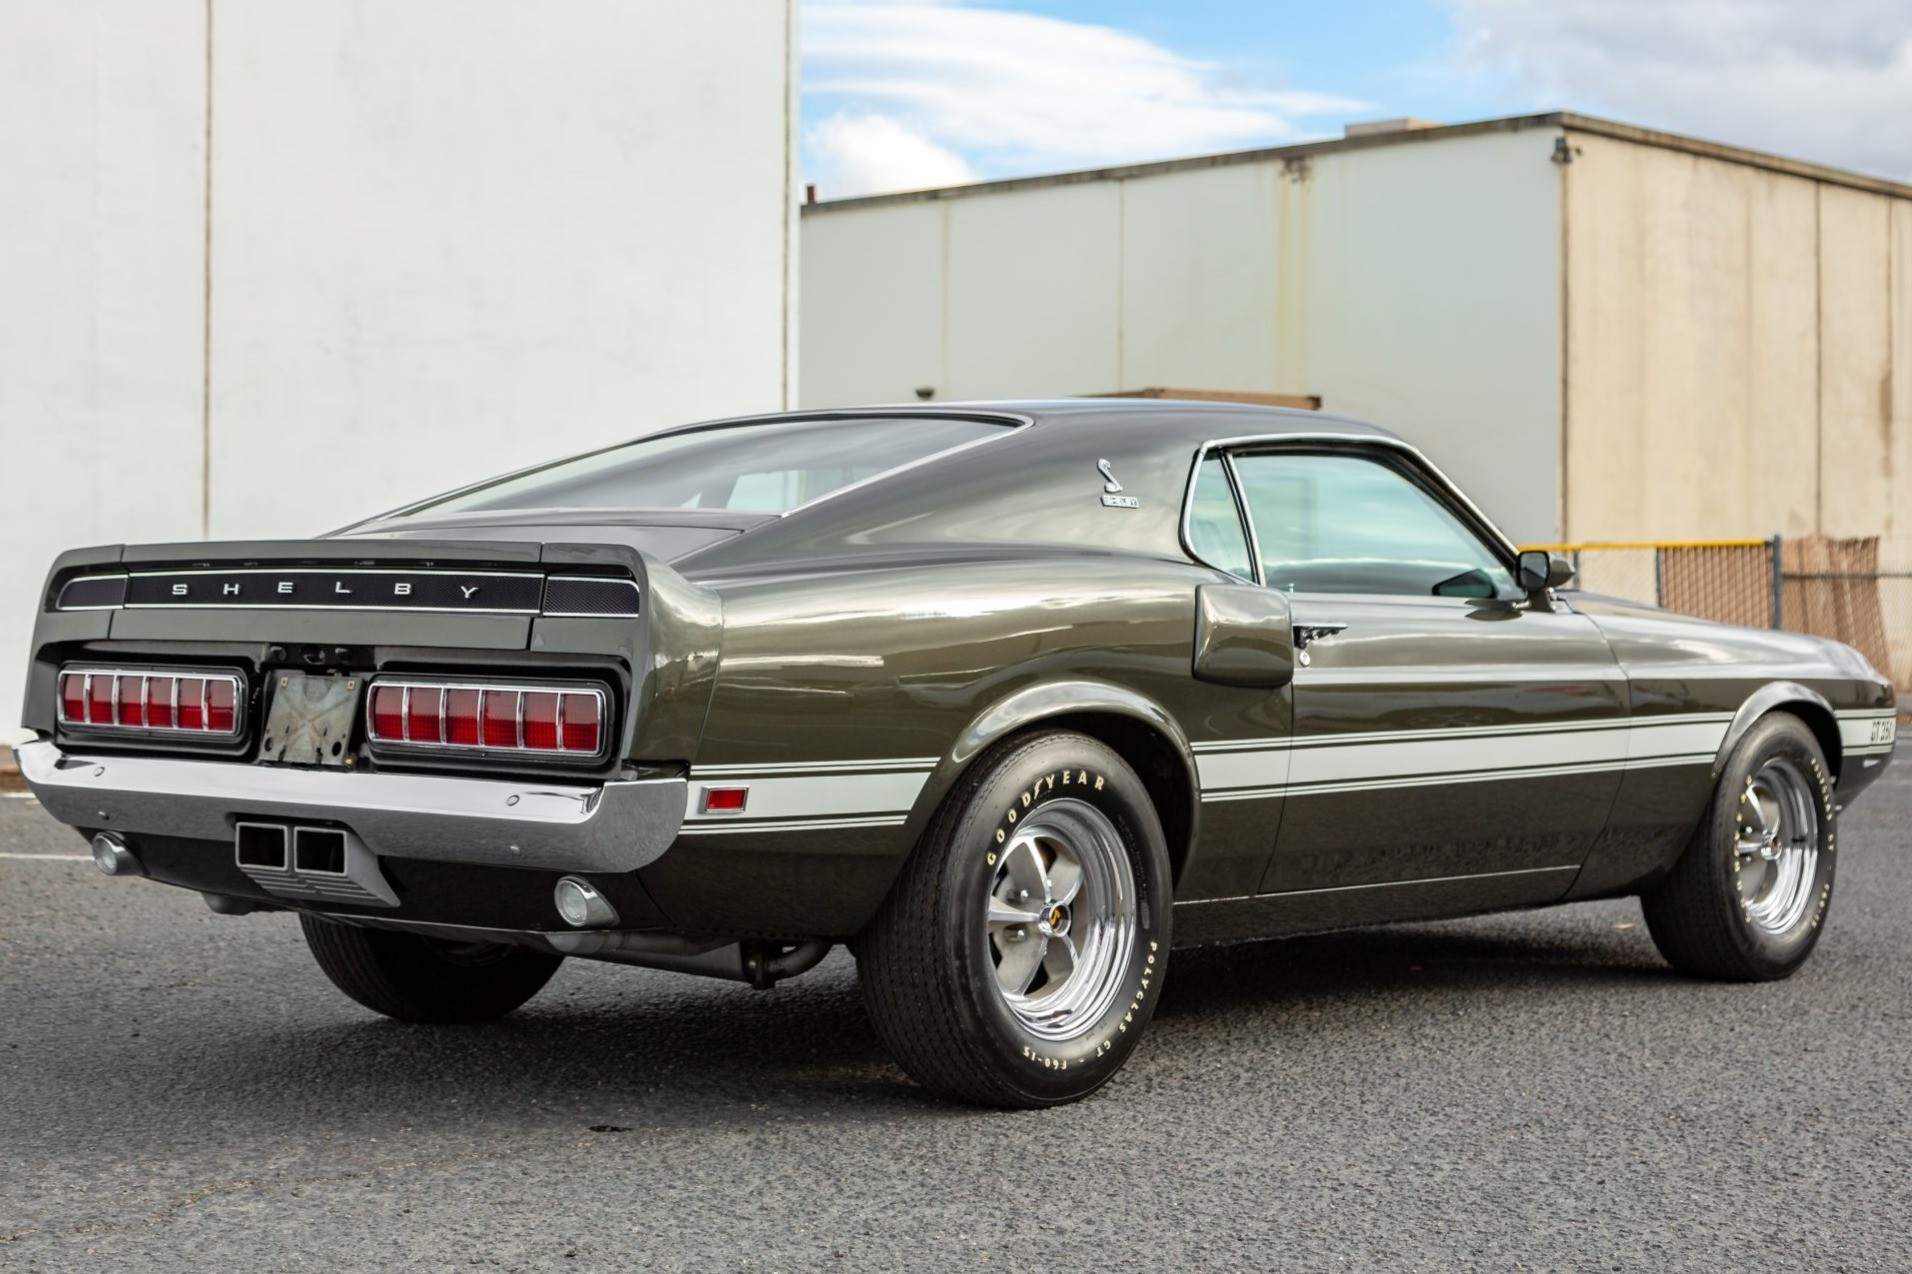 You Might Not Want To Buy a Former Rental Car, Unless It's a Shelby ...